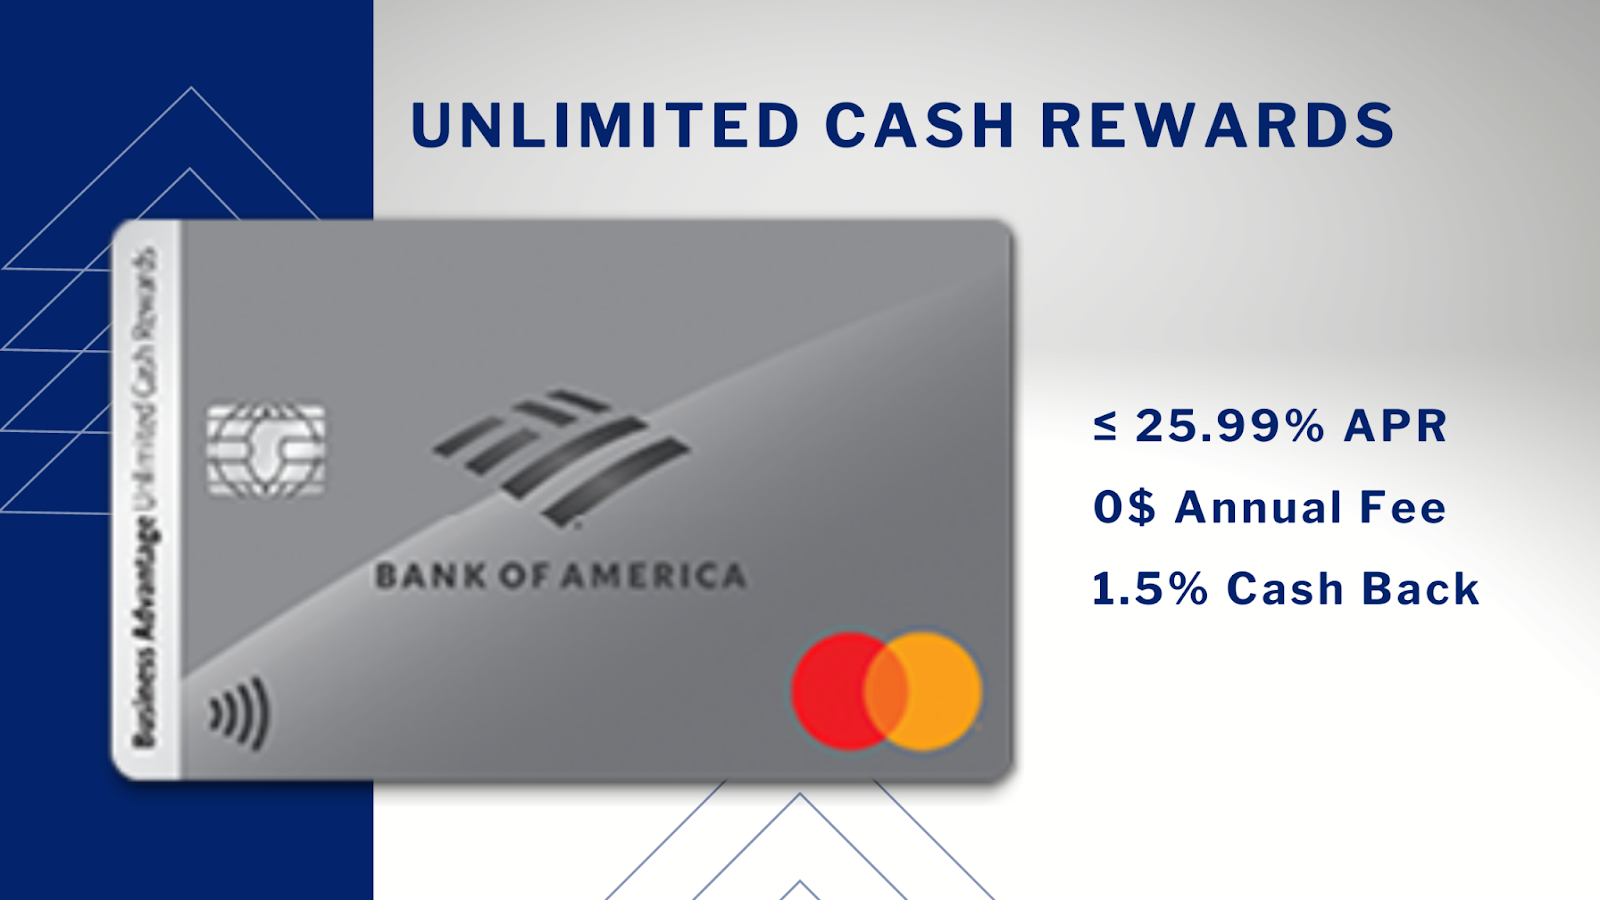 Bank of America Business Account: Unlimited Cash Rewards Card